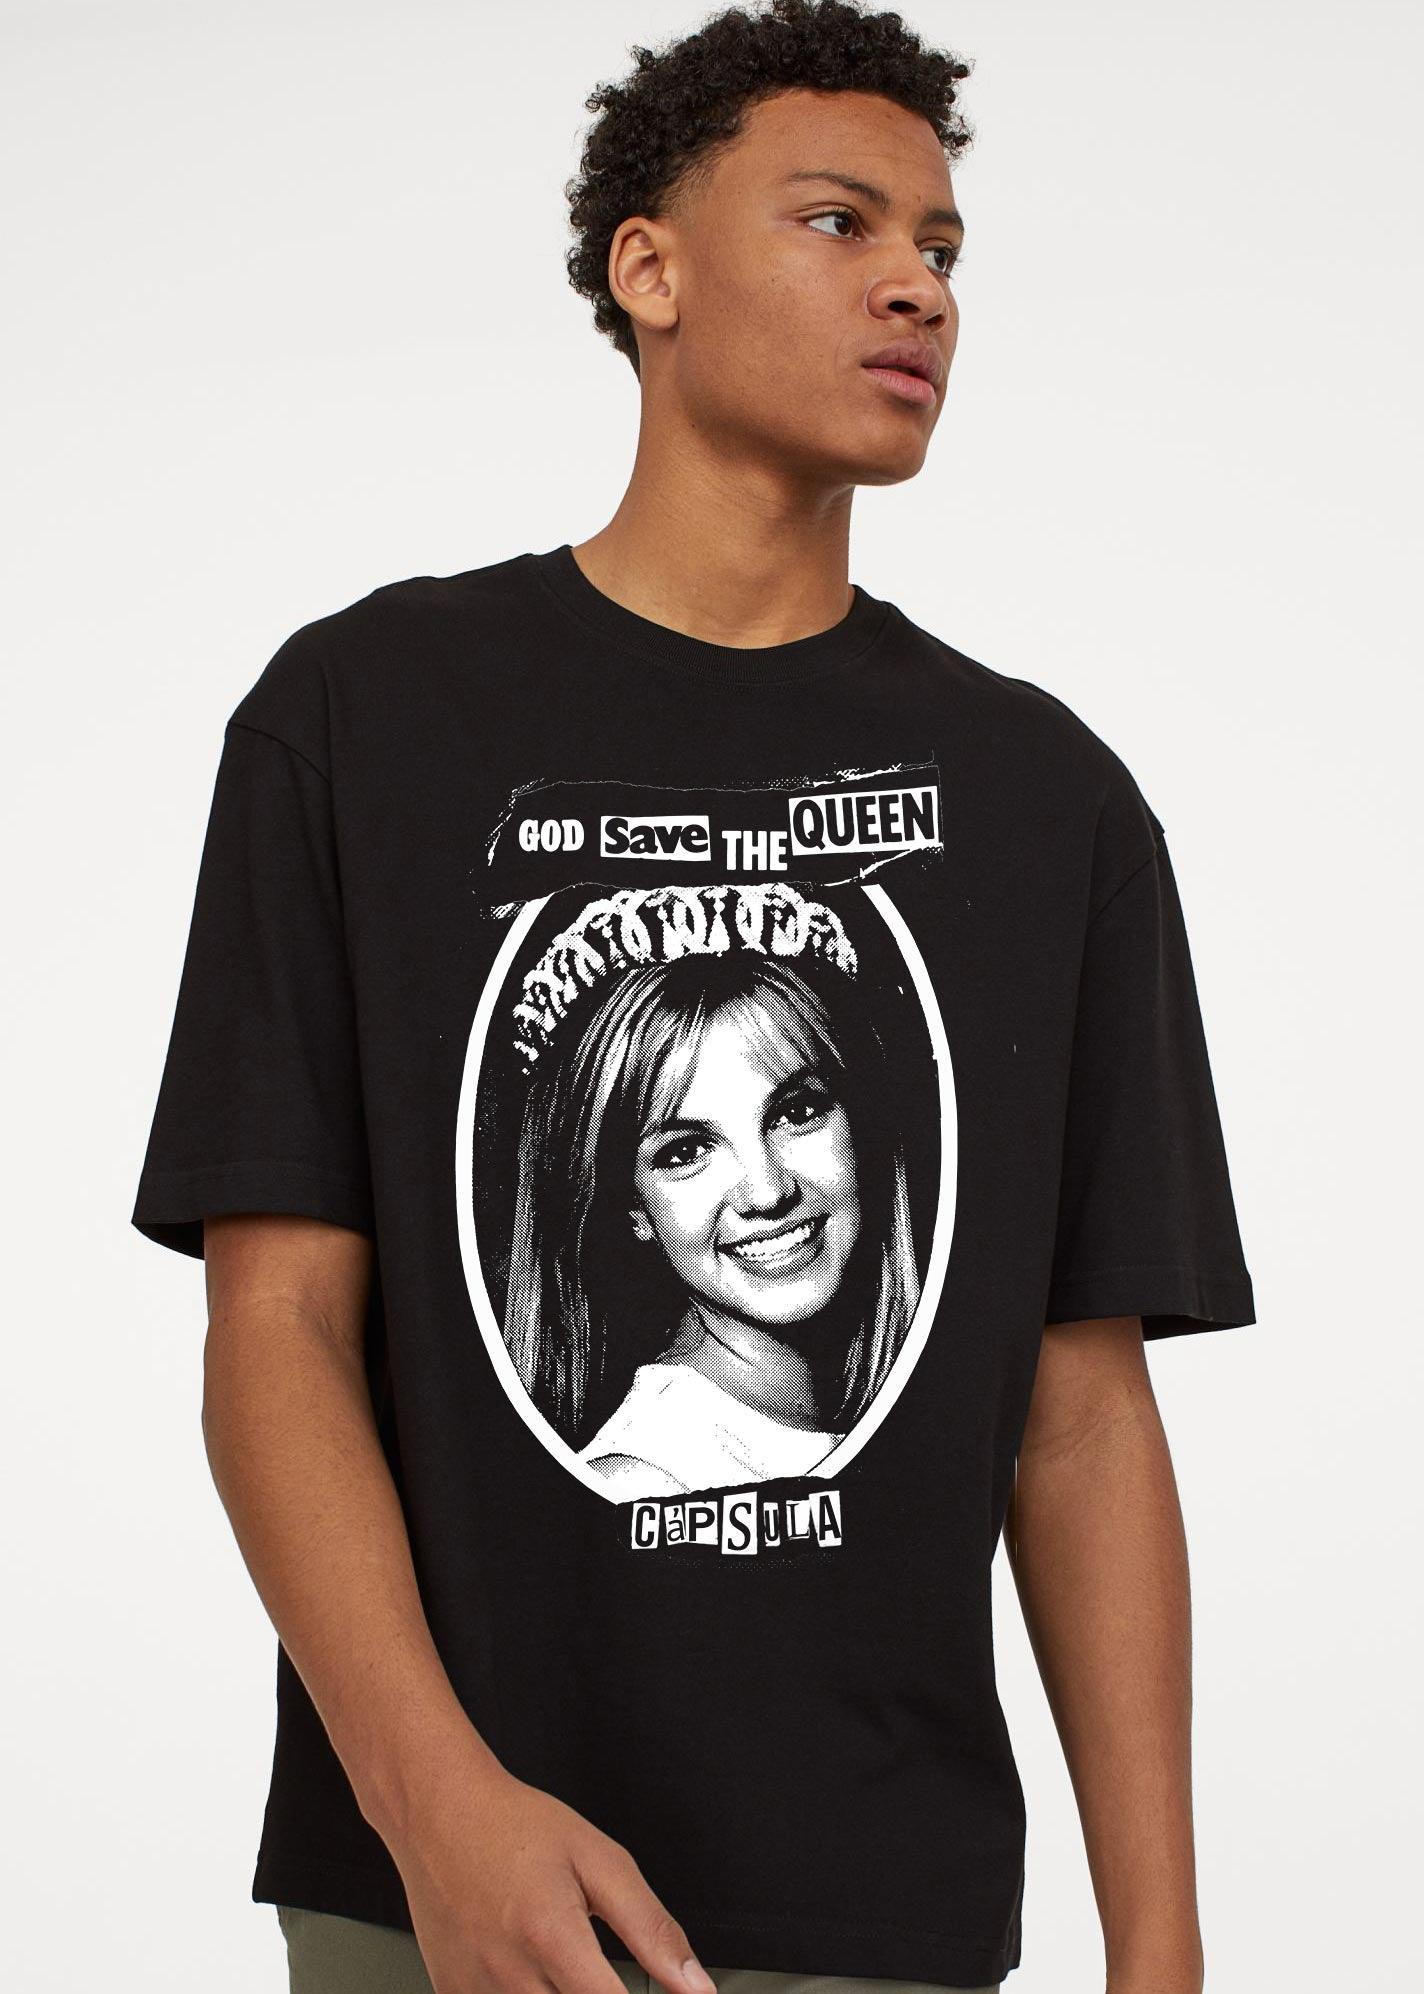 Britney God Save The Queen Diva – Shop